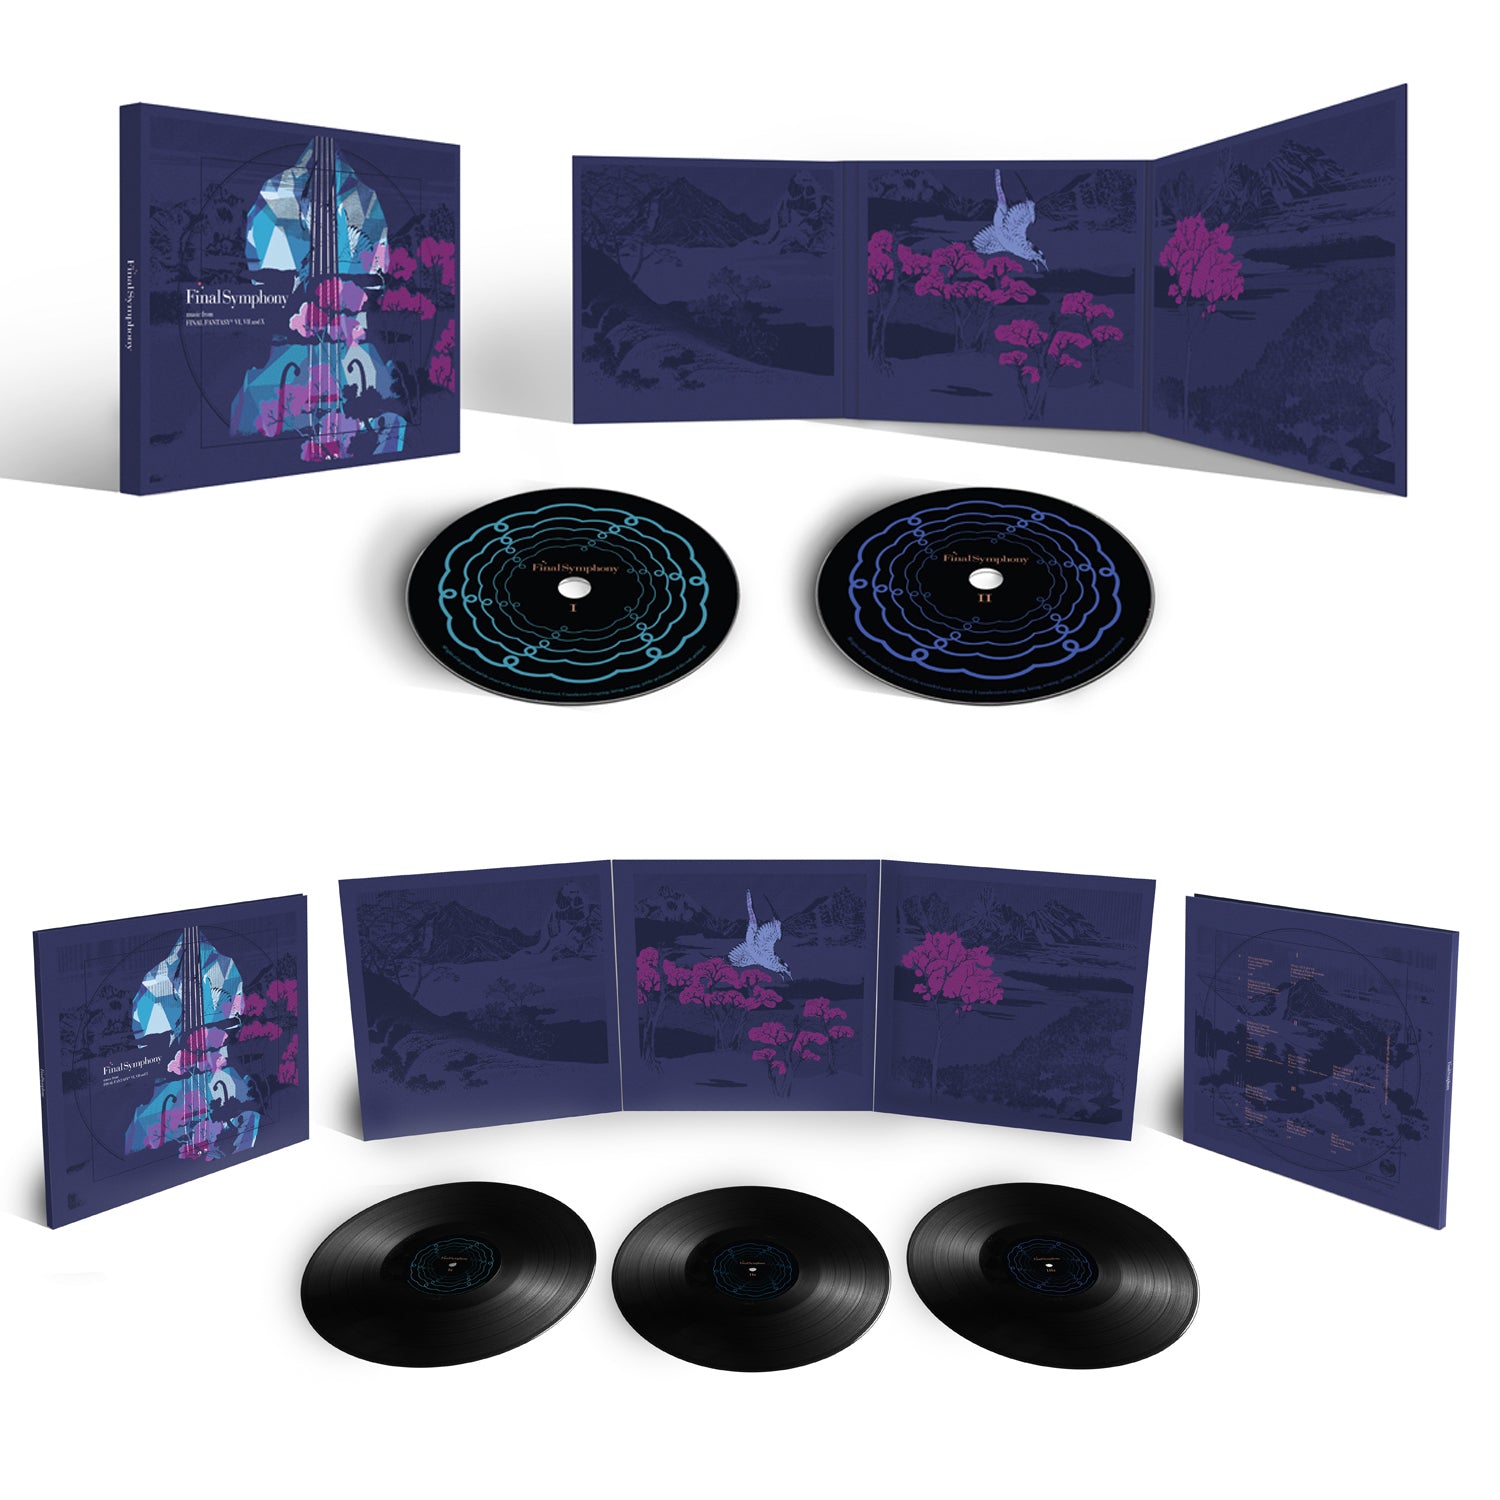 Final Symphony is available on deluxe CD and 3xLP vinyl at LacedRecords.com